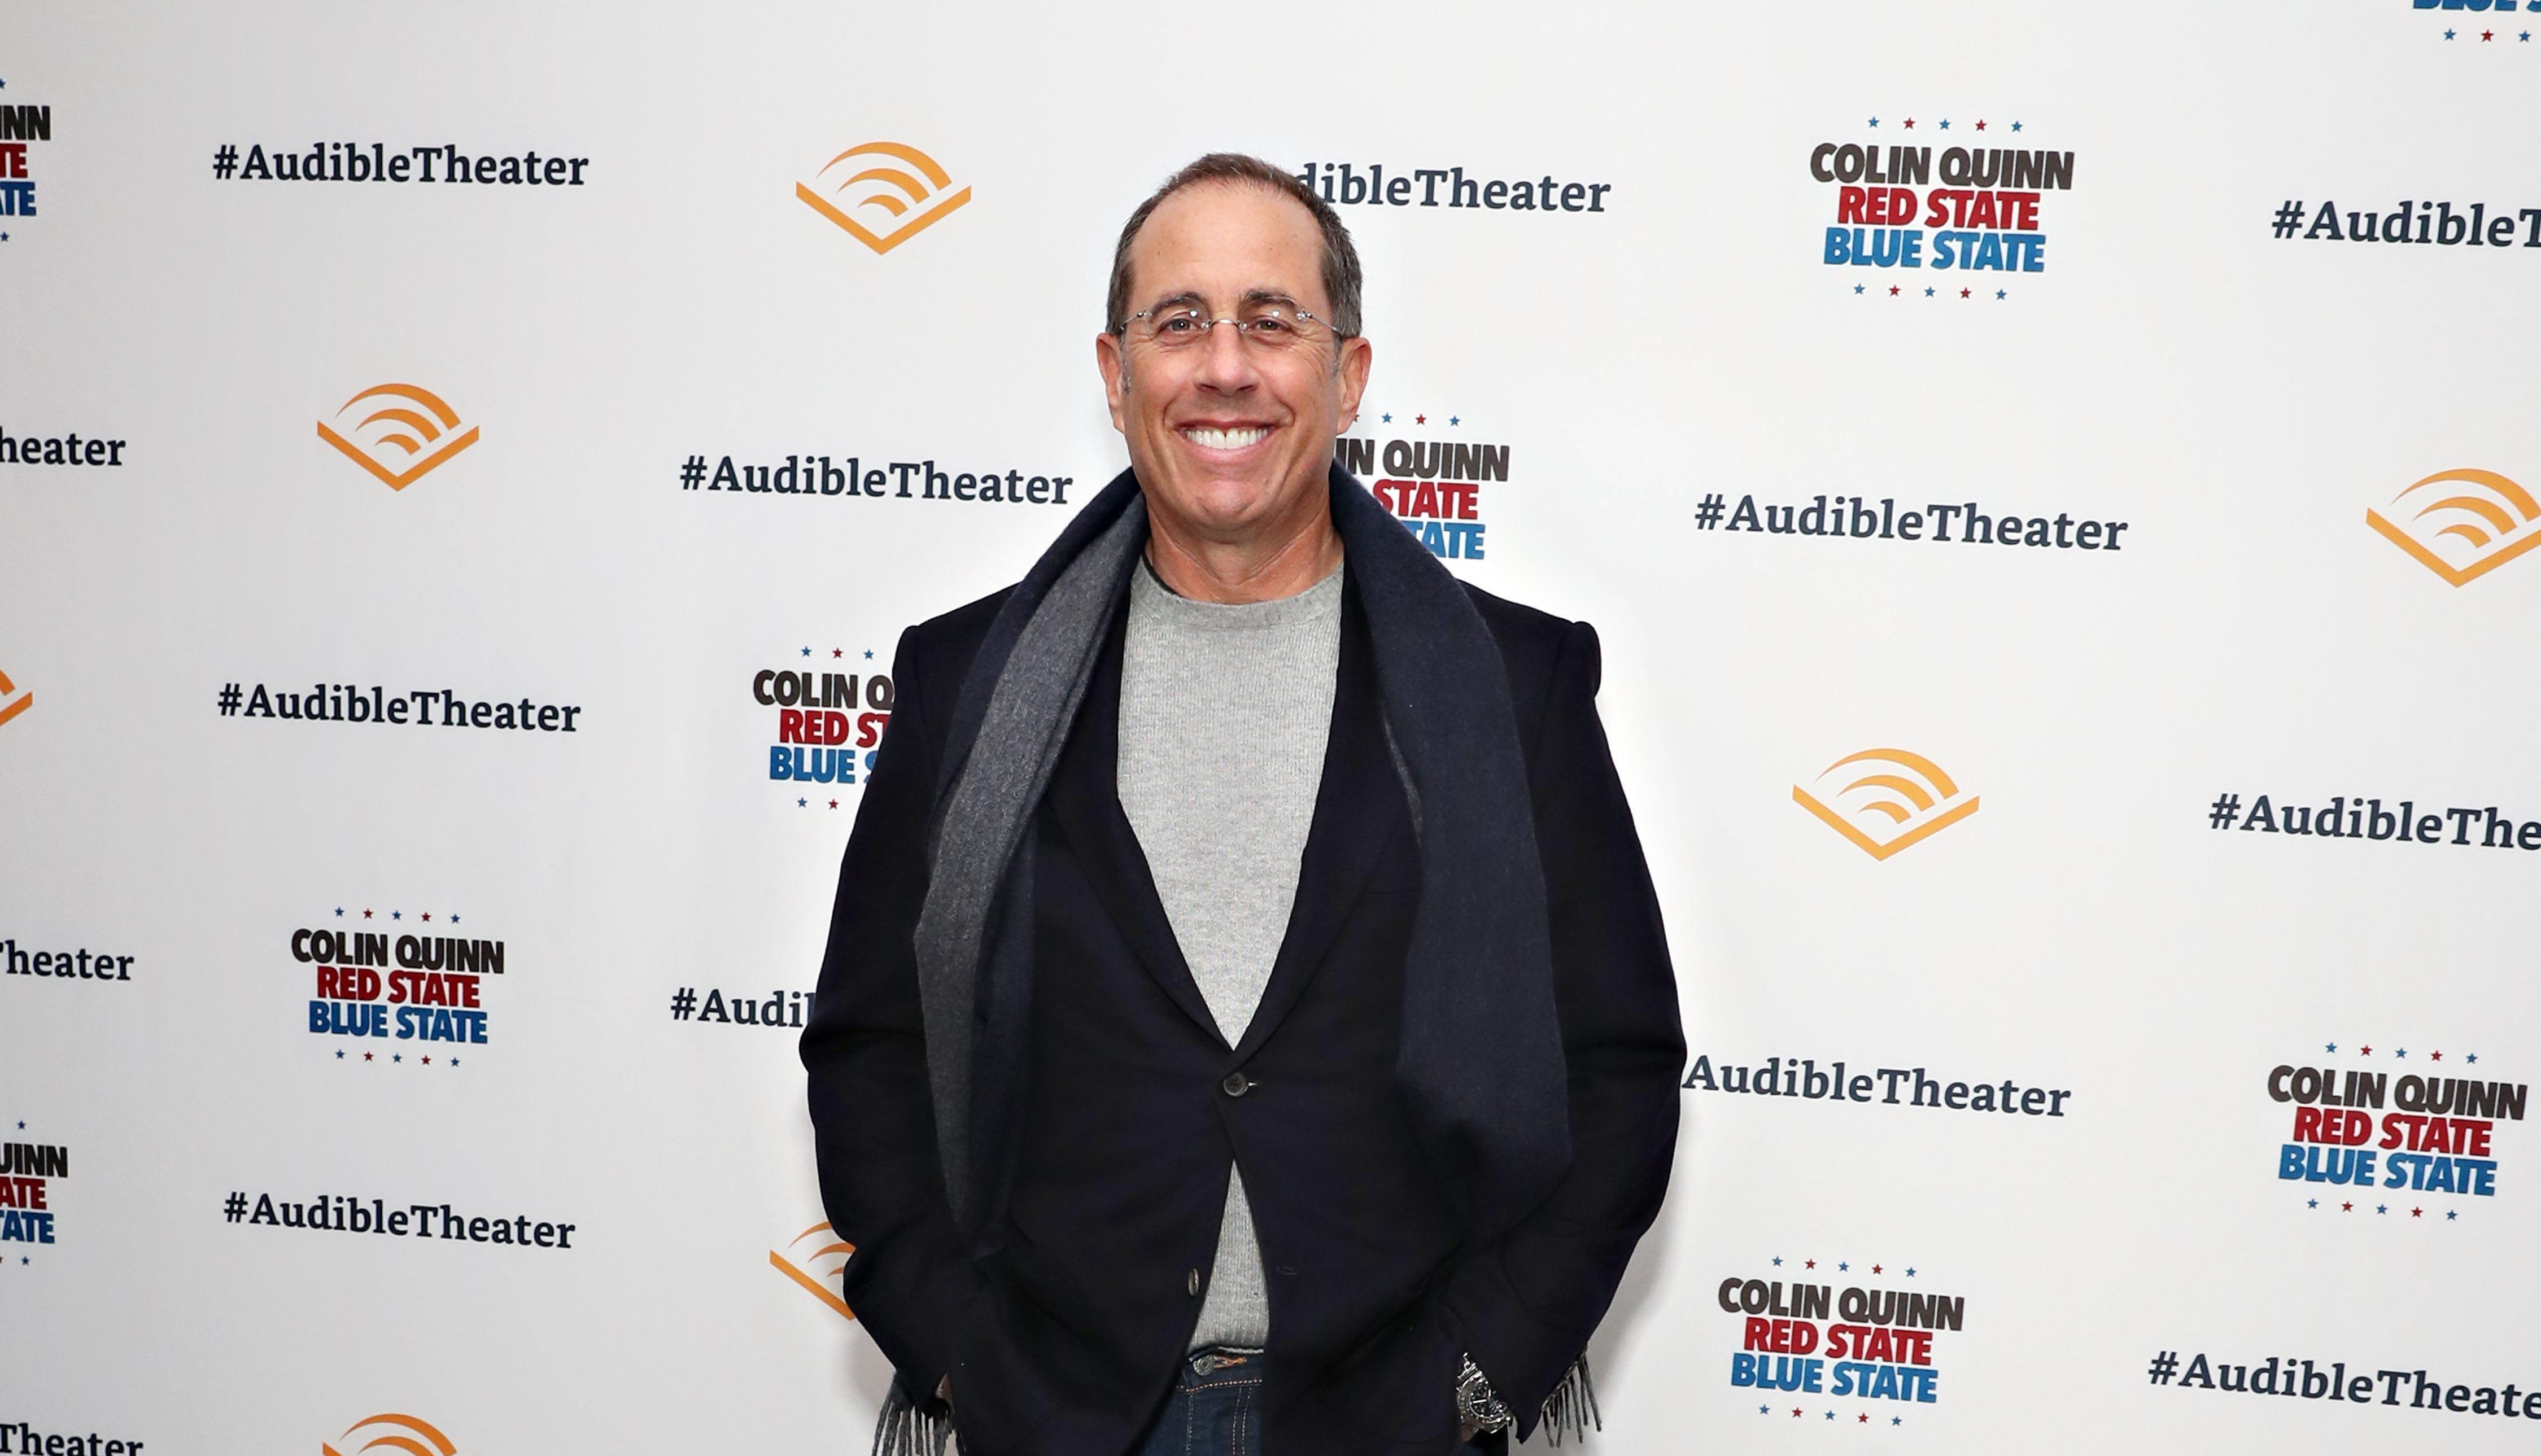 Like His TV Counterpart, Jerry Seinfeld Has an Extensive Dating History